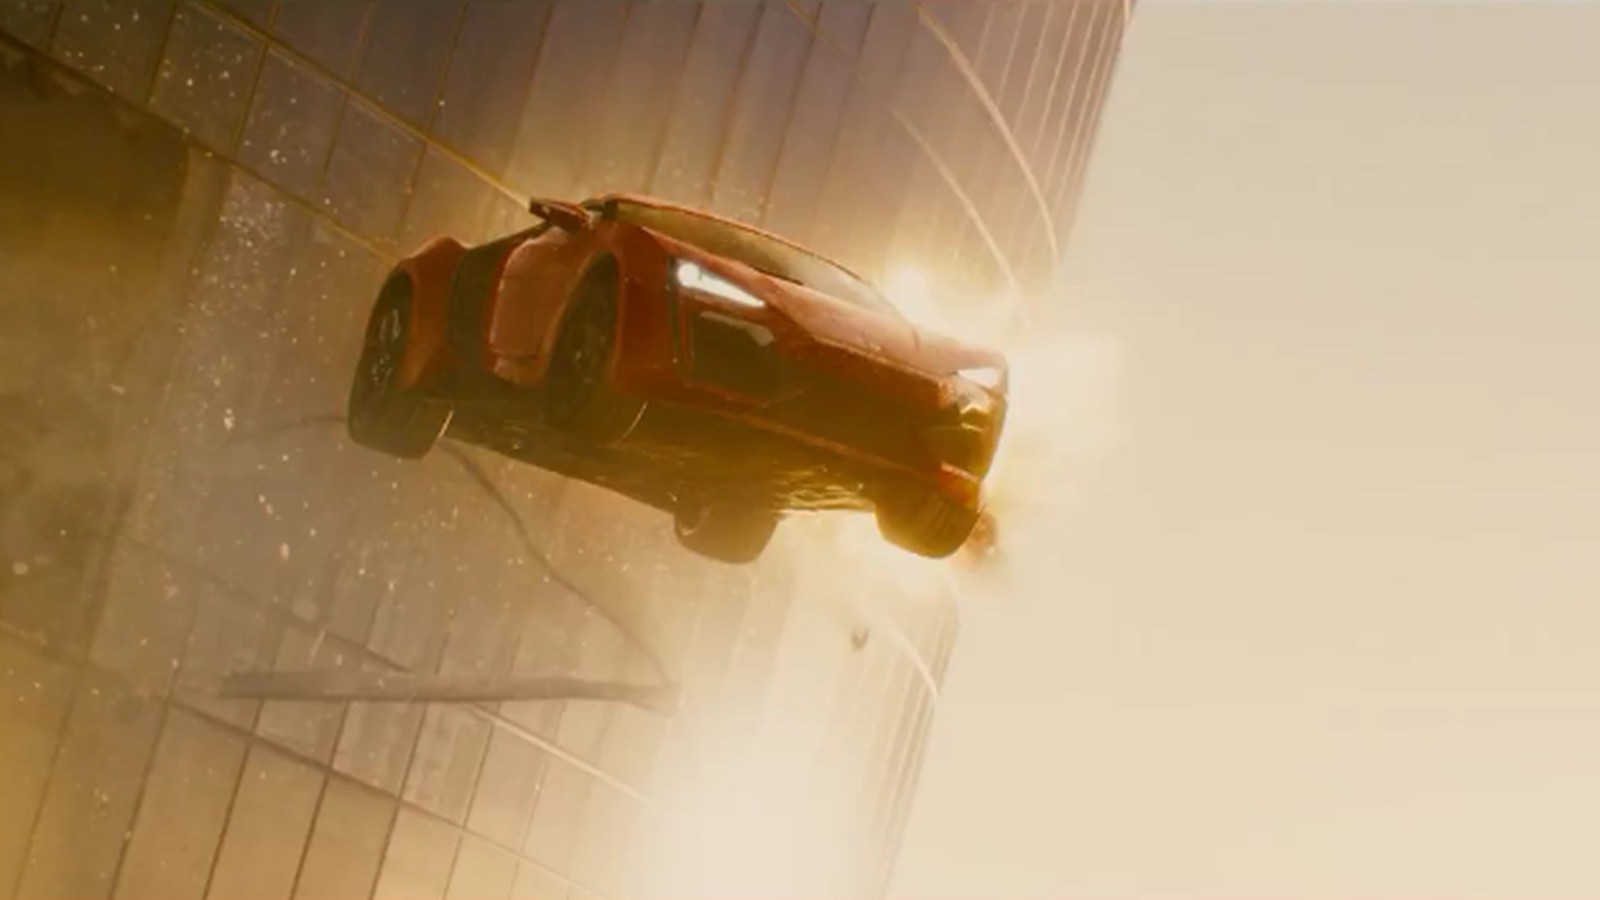 Making the death-defying jump in Fast and Furious 7